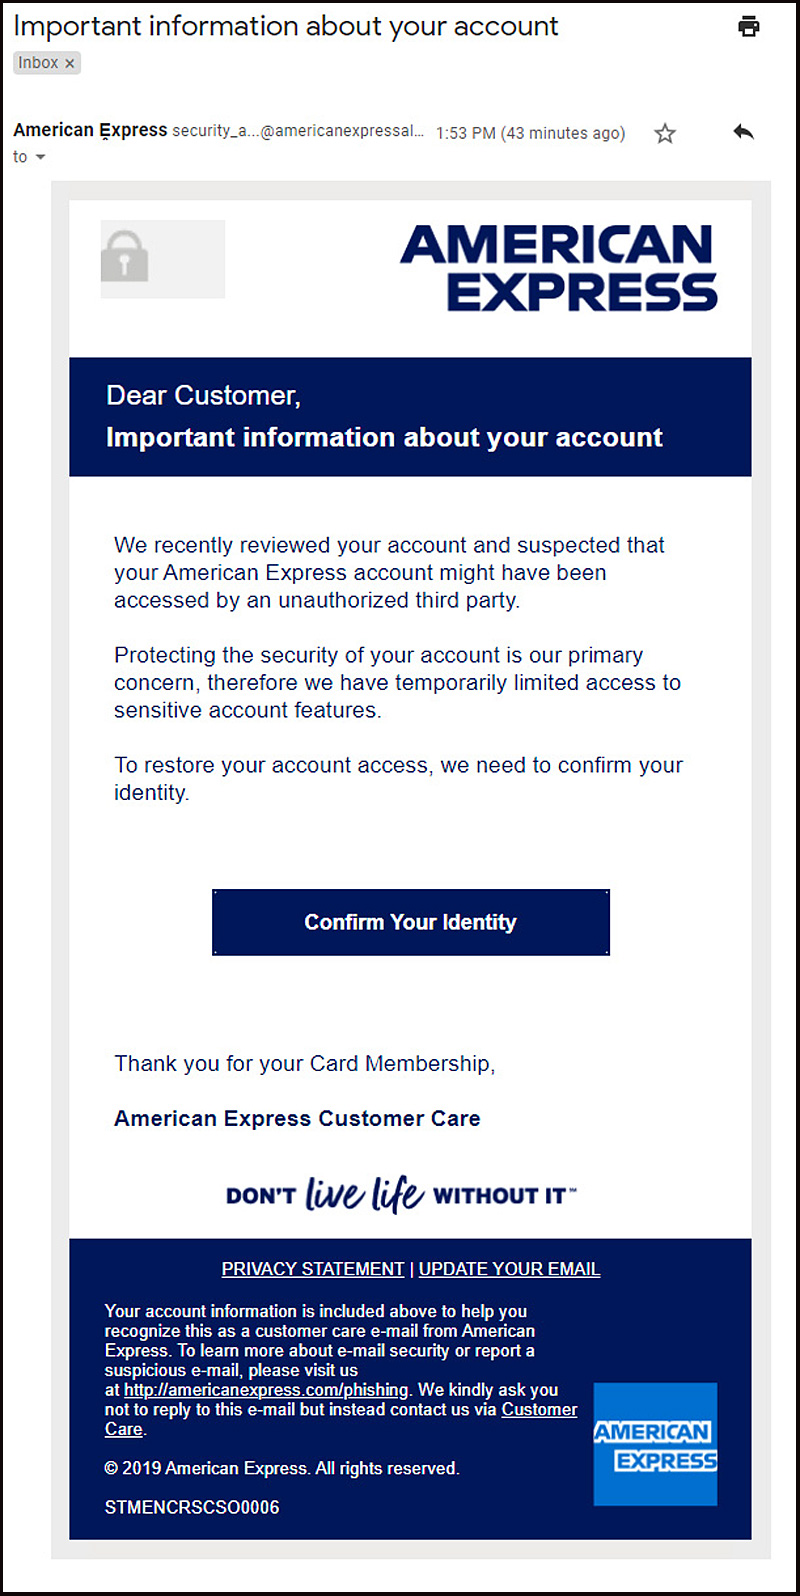 This AMEX Email Phishing Scam Wants You Homeless & Poor, With A Zero